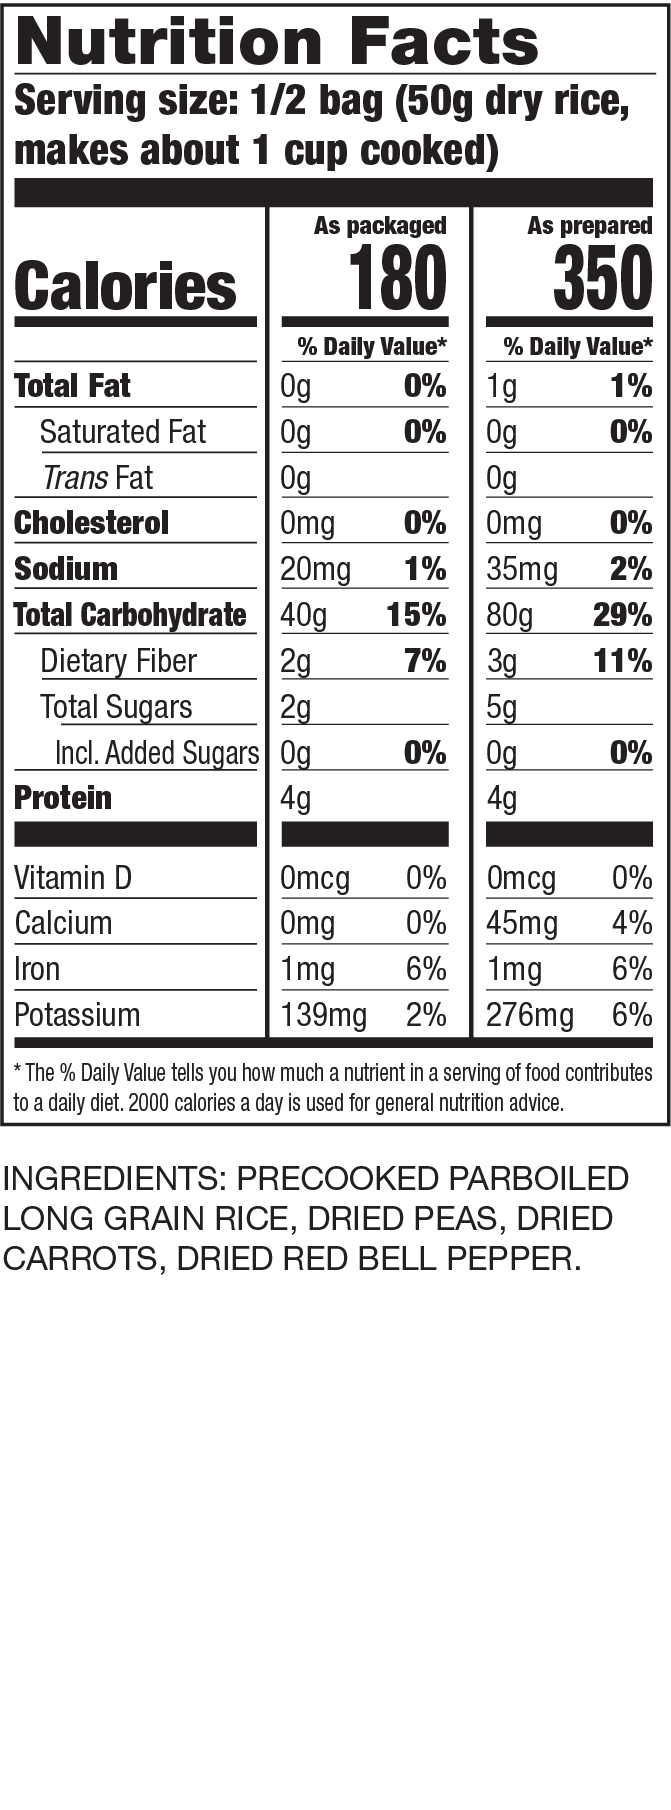 Nutrition Facts White Rice, Peas, Carrots & Red Bell Peppers